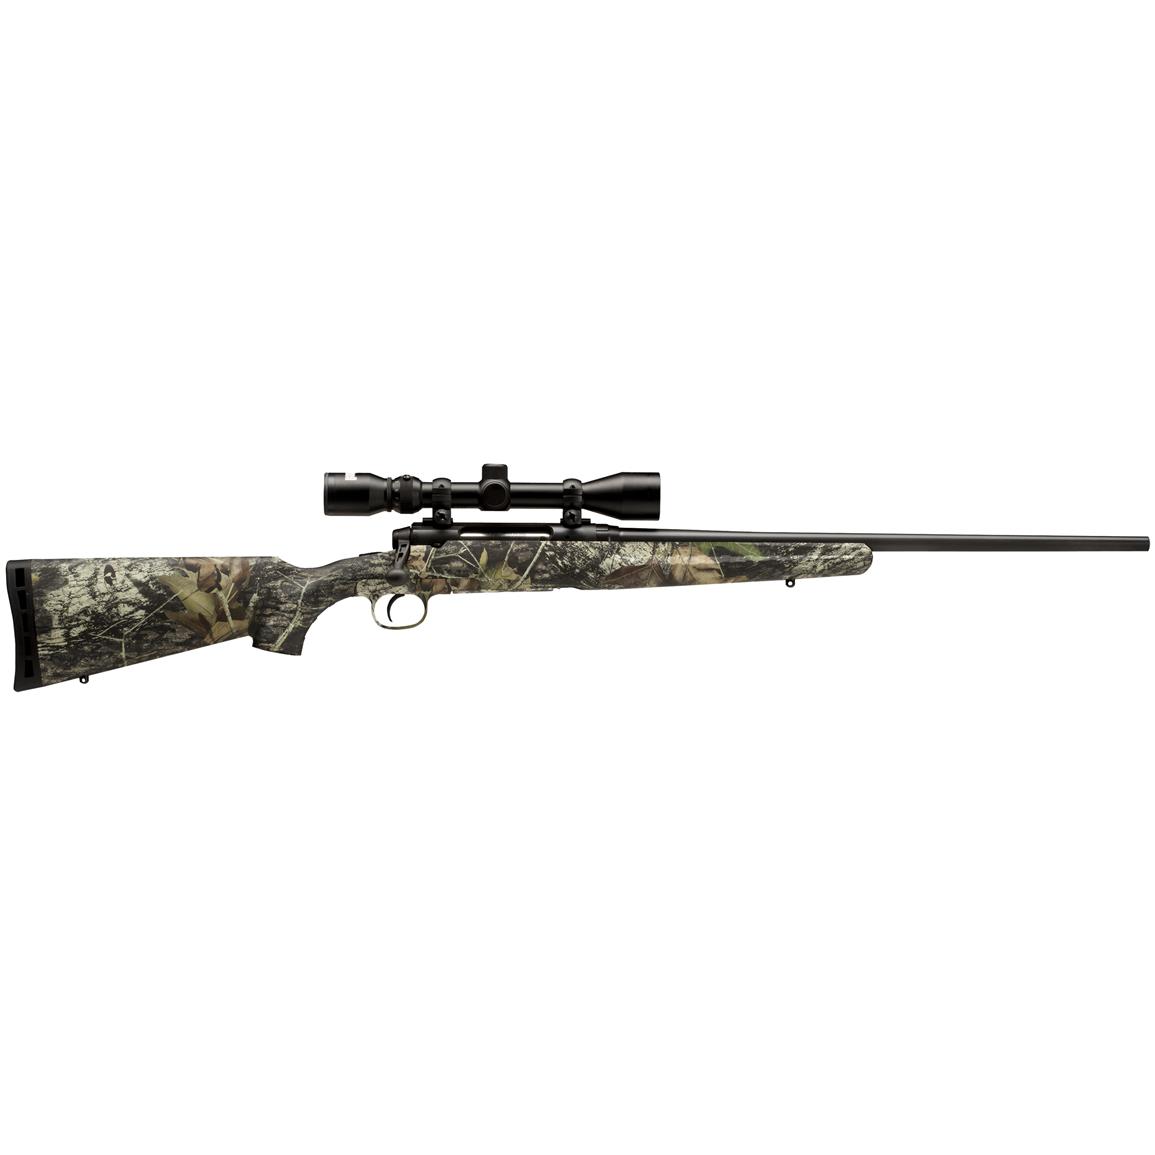 Savage Axis XP Camo Series, Bolt Action, .243 Winchester, 22" Barrel, 3-9x40mm Scope, 4 1 Rounds